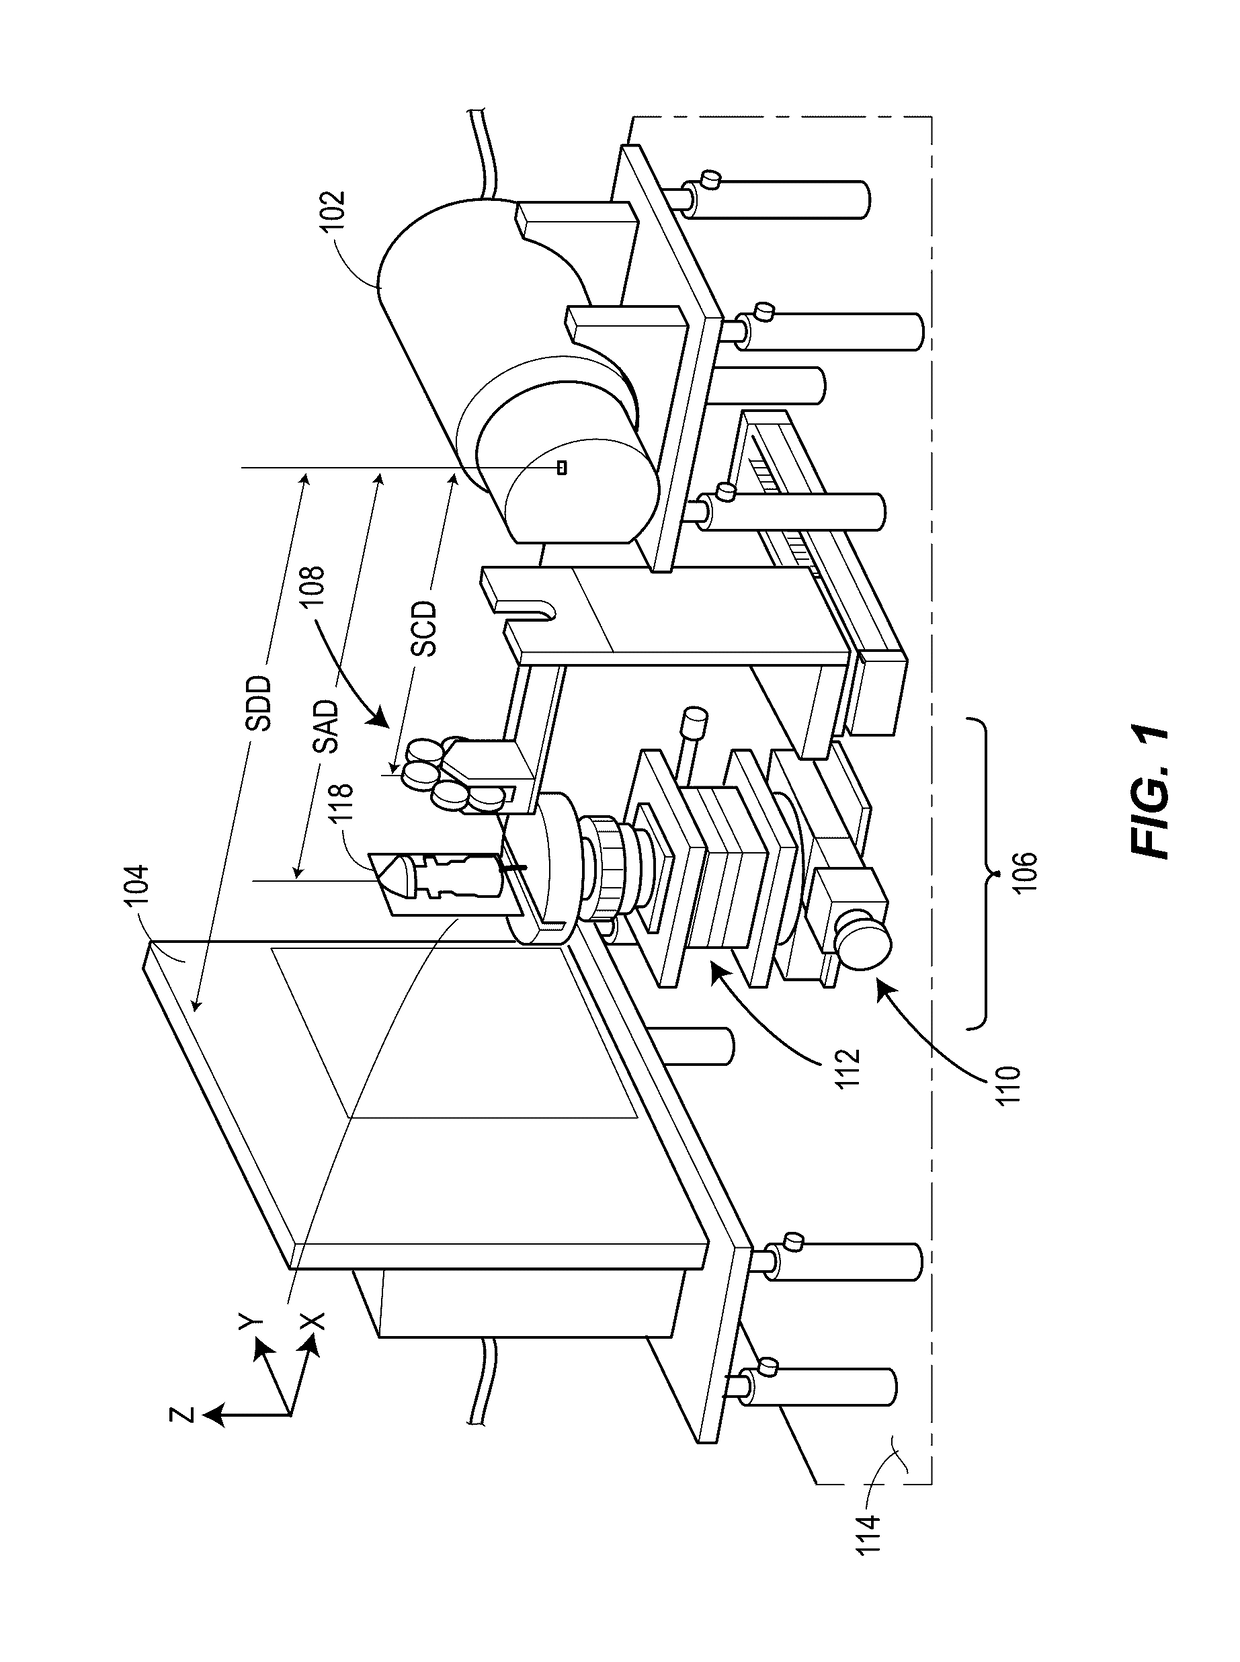 Image Guided Small Animal Stereotactic Radiation Treatment System